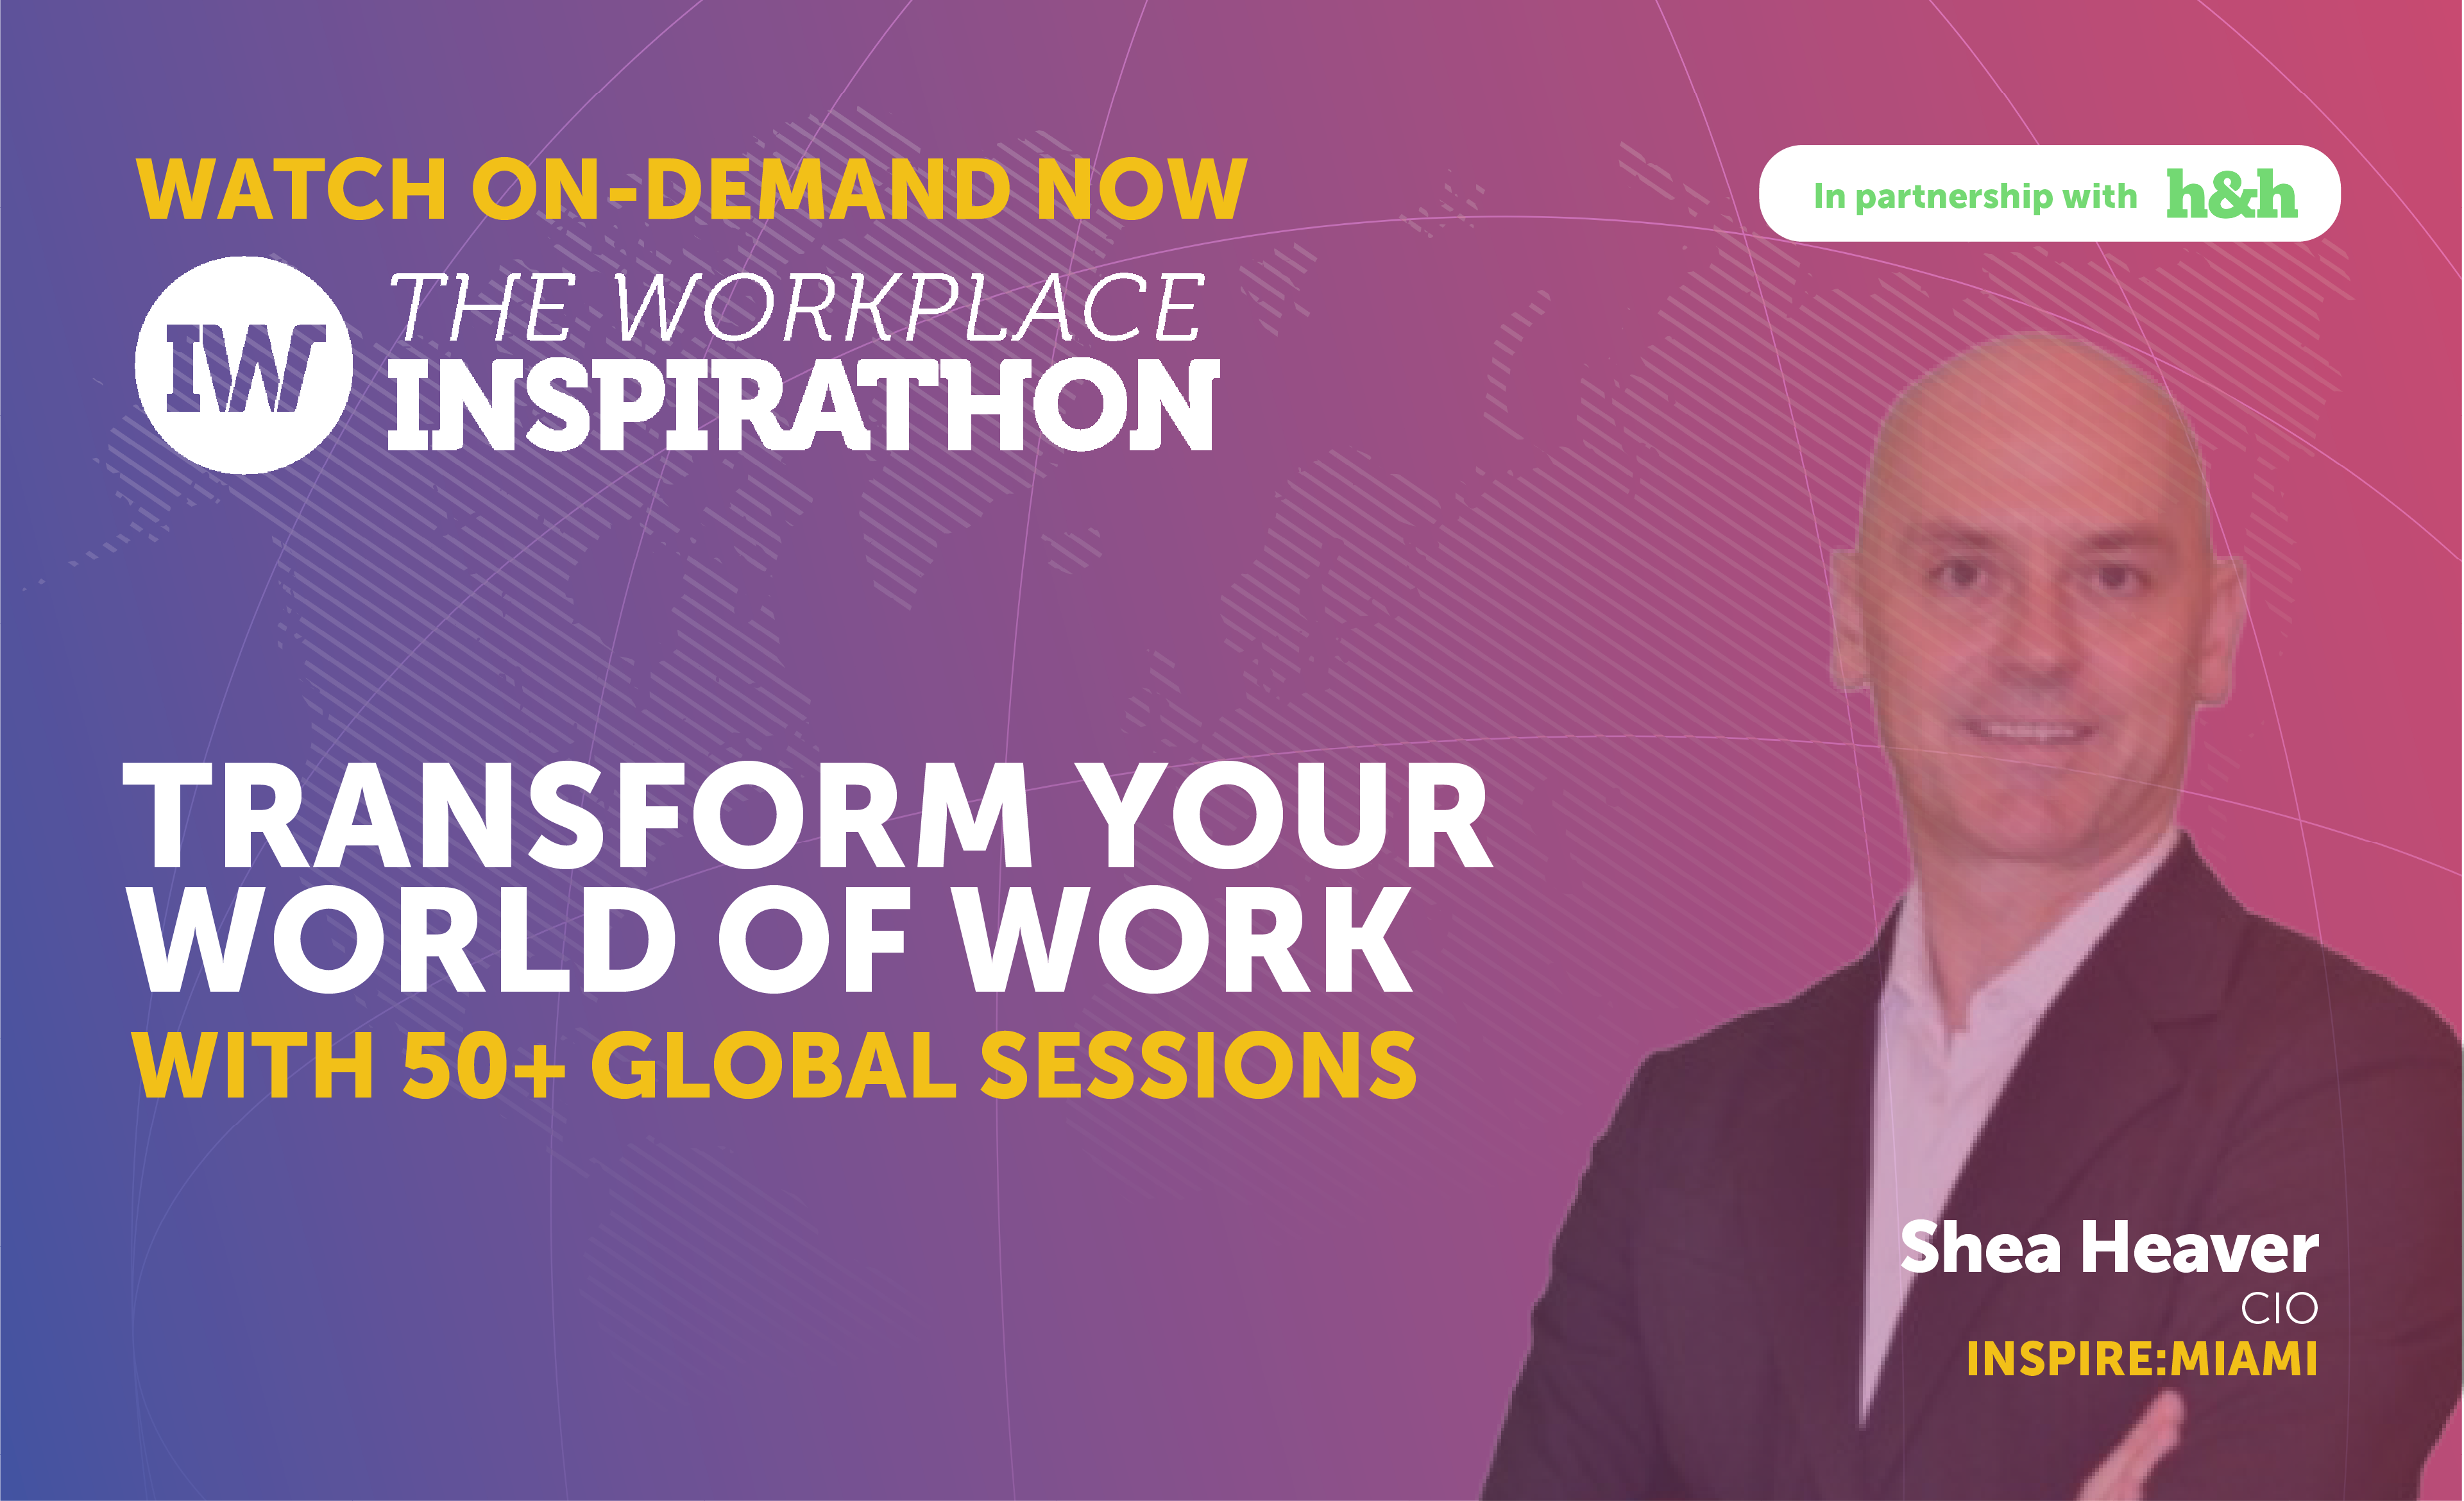 On Demand Video: The Power of Value in The Workplace | Shea Heaver